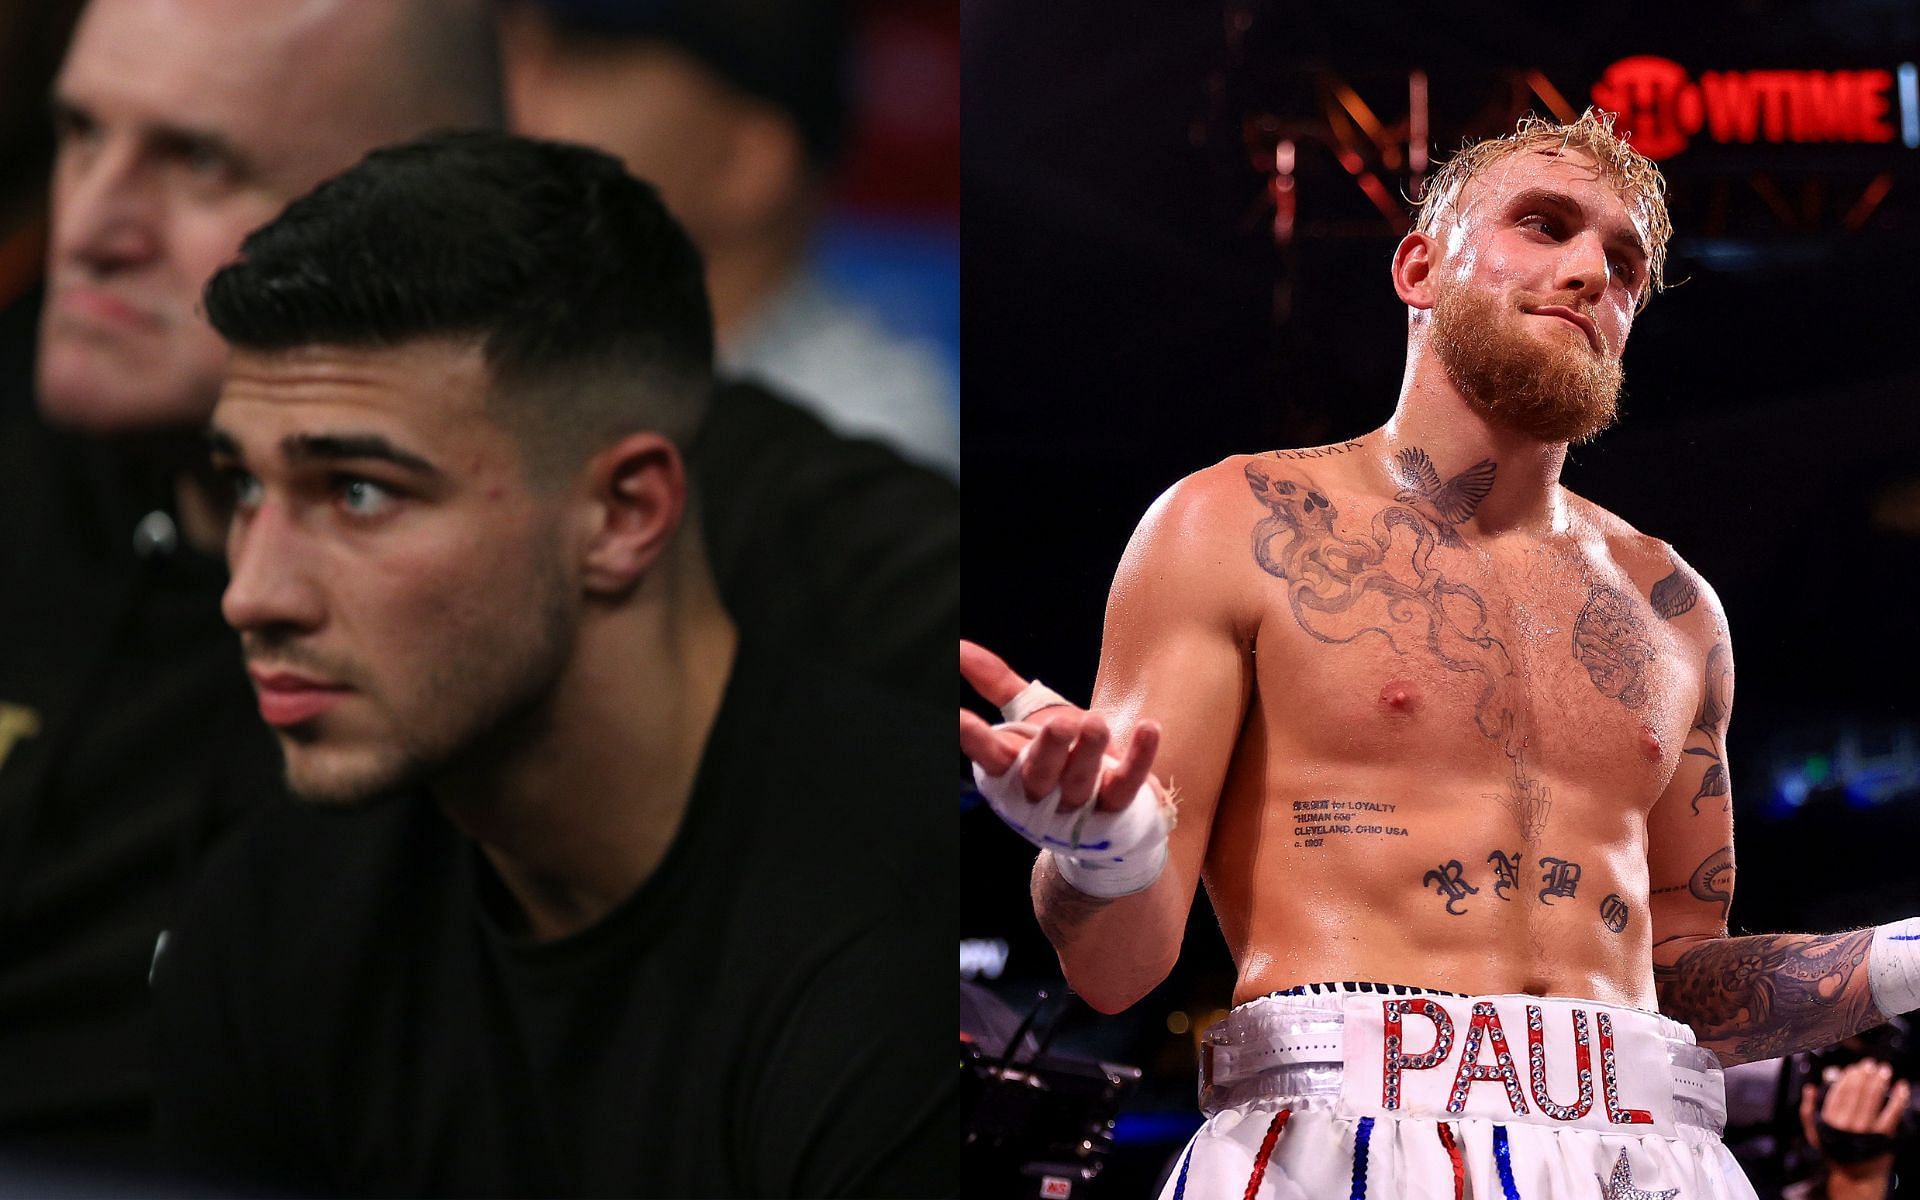 Tommy Fury (left) and Jake Paul (right) (Image credits Getty Images)